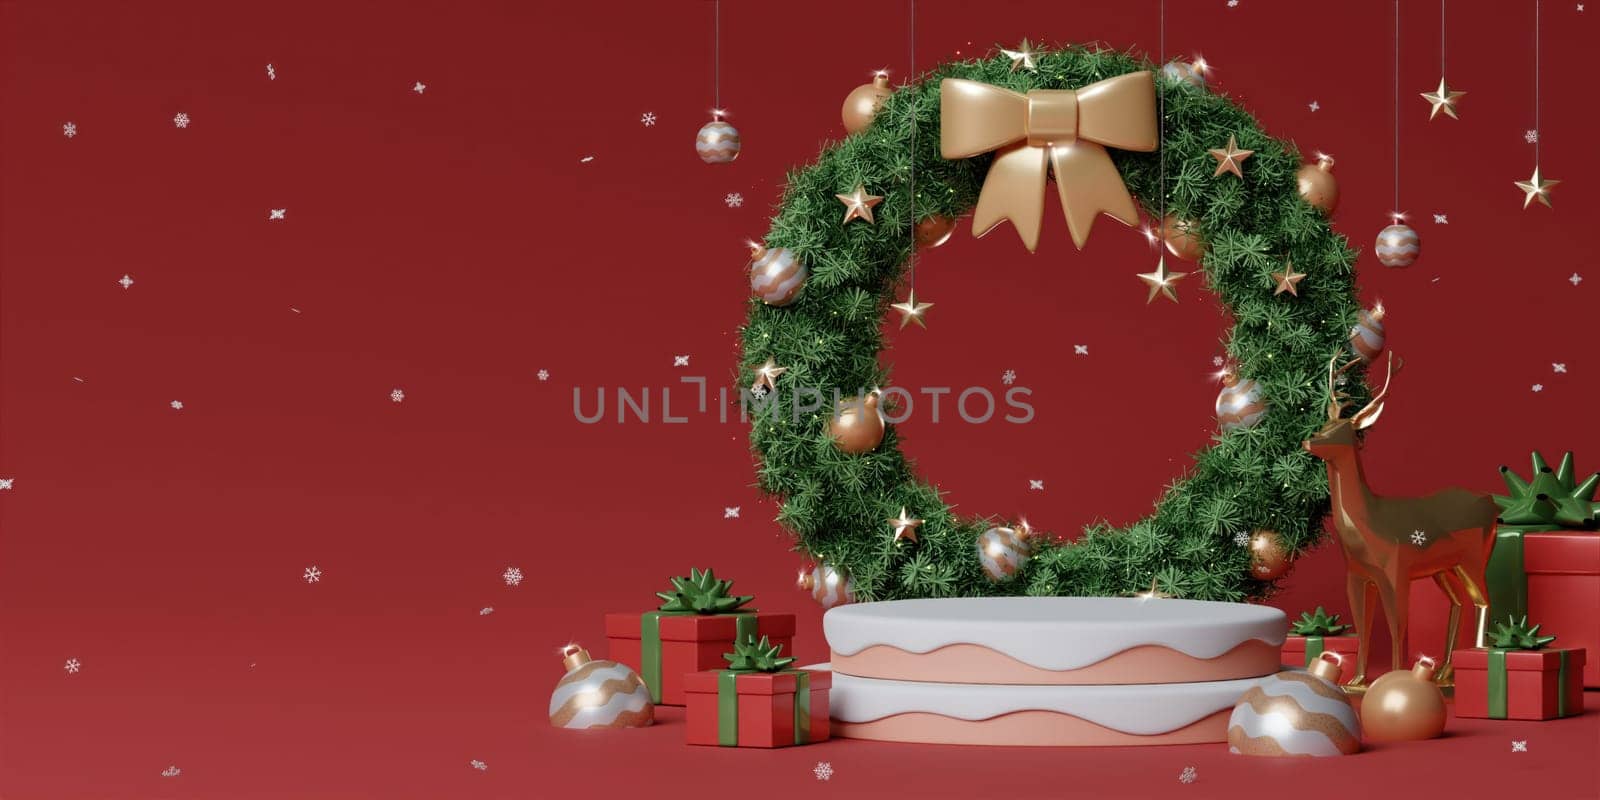 3d Christmas wreath podium. Realistic 3d design stage podium. Decorative festive elements glass bauble balls. Xmas holiday template podium. by meepiangraphic